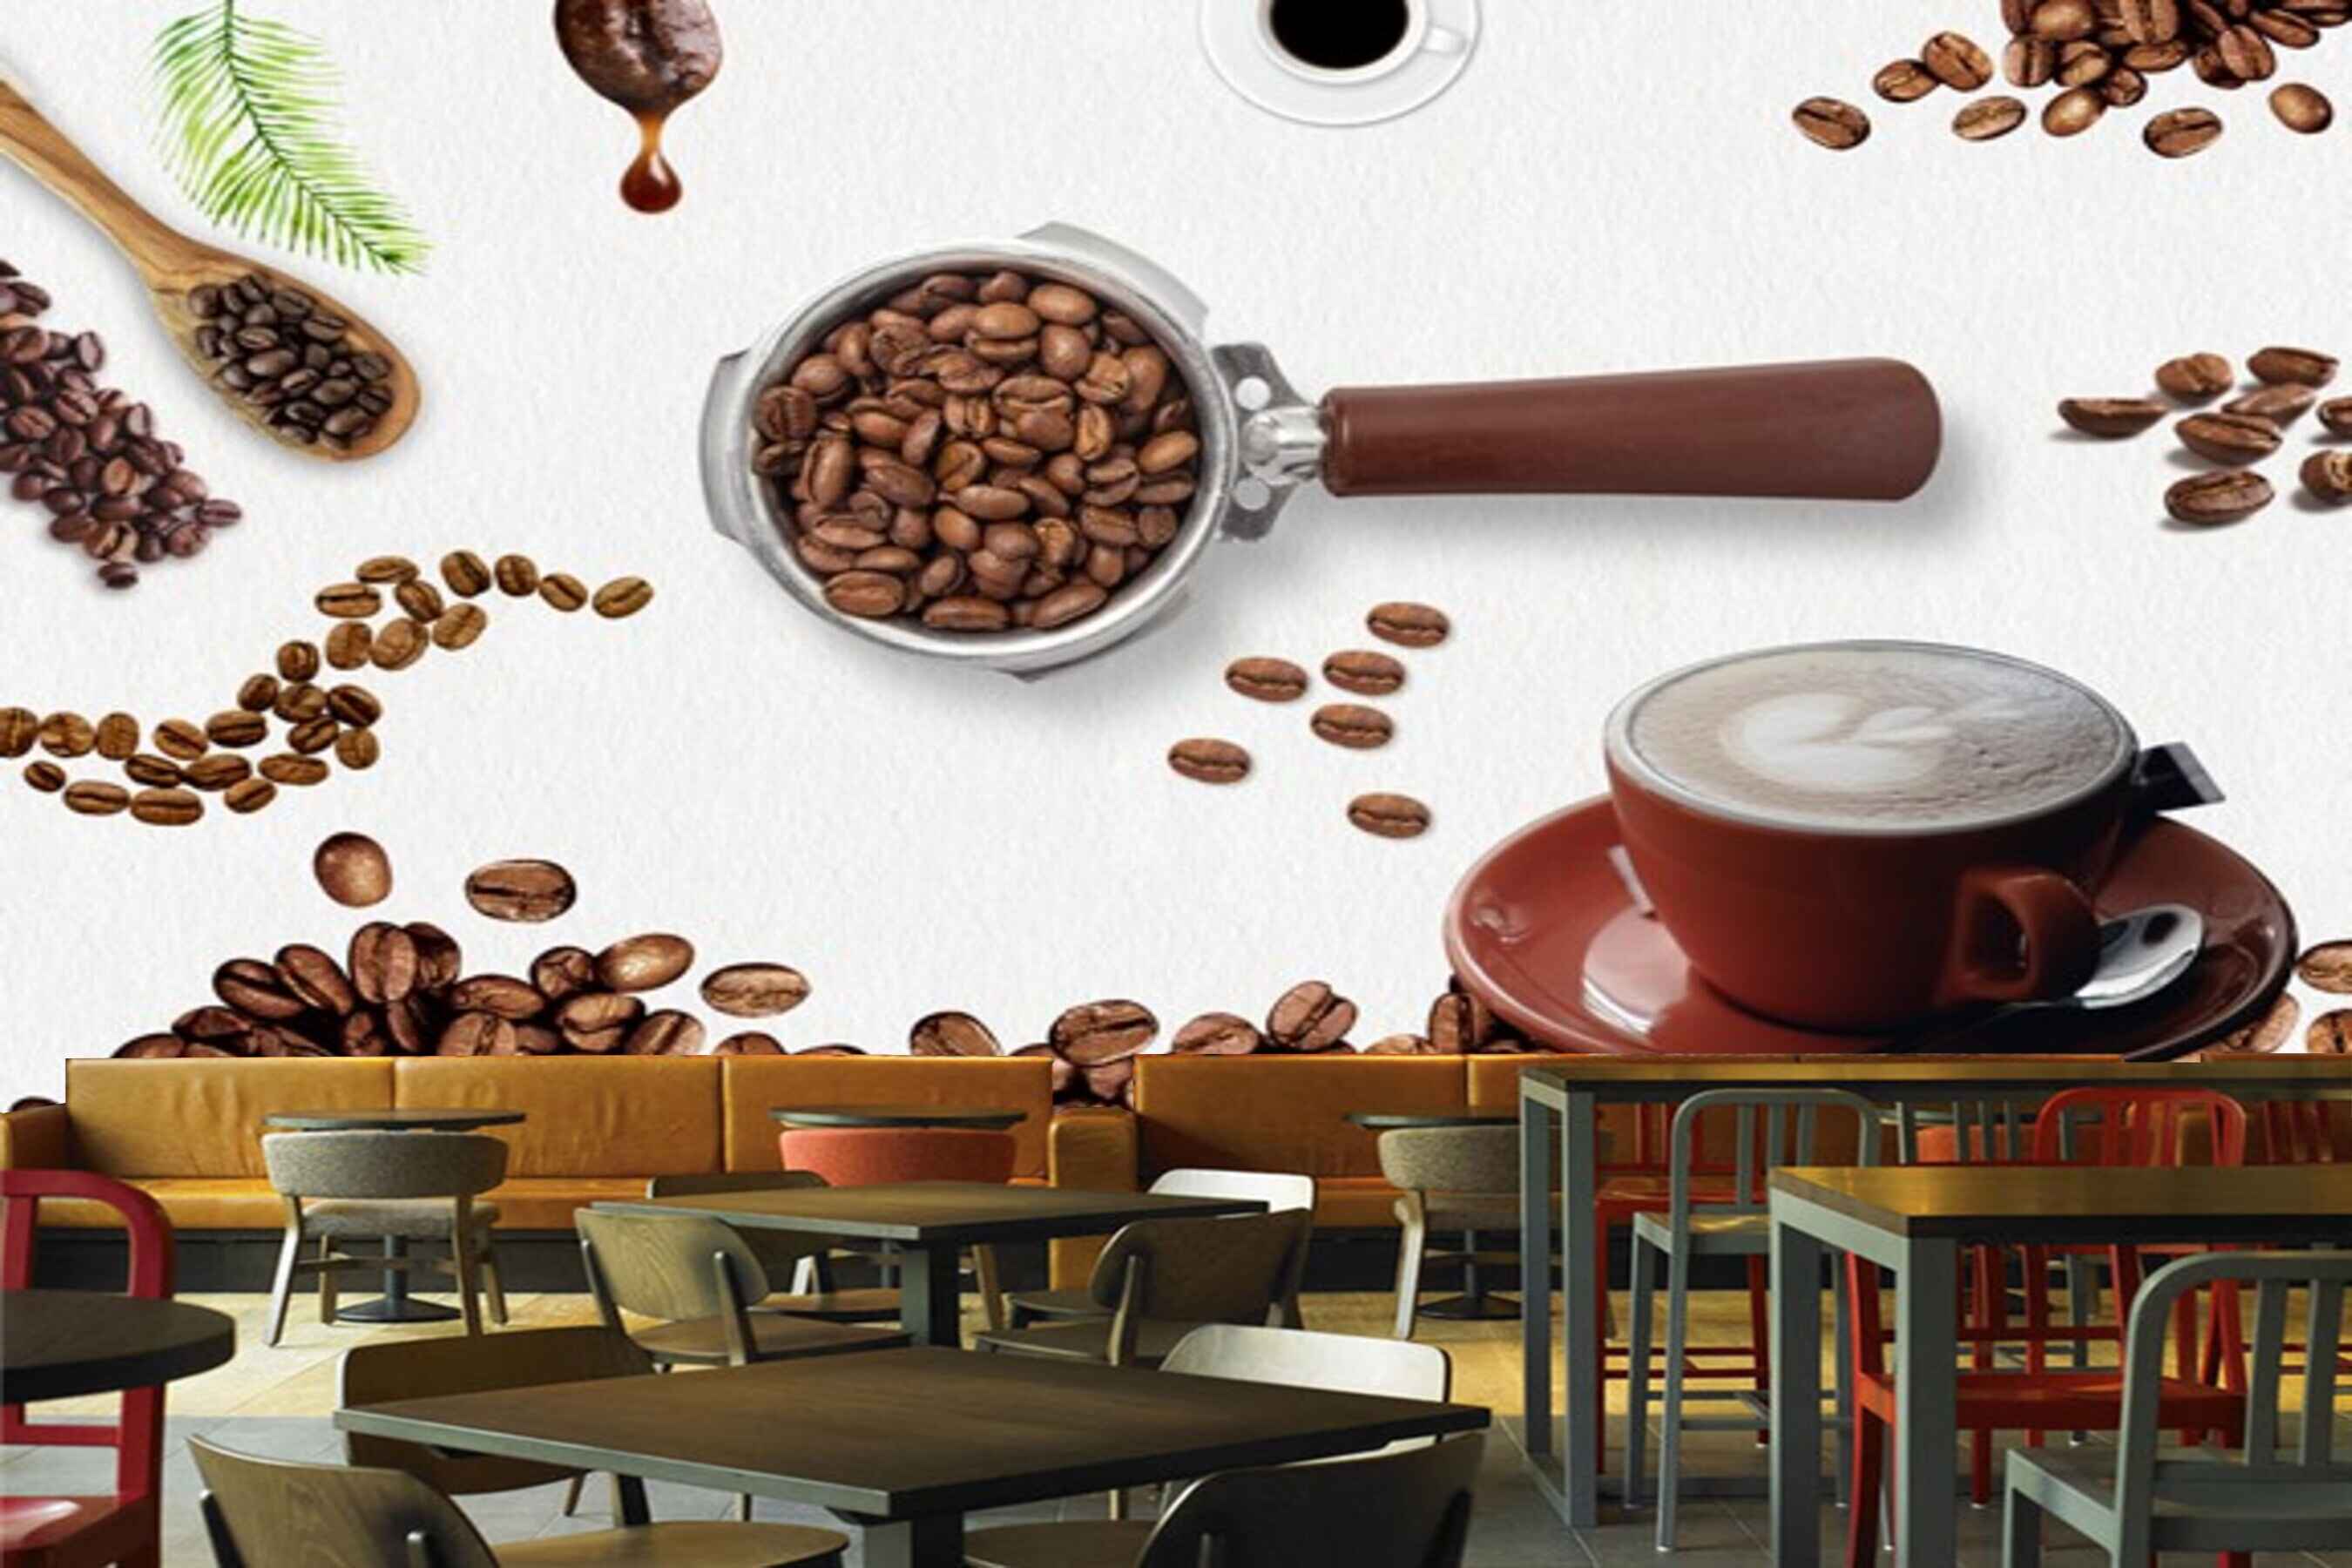 Avikalp MWZ3041 Coffee Beans Cups Saucers Leaves HD Wallpaper for Cafe Restaurant